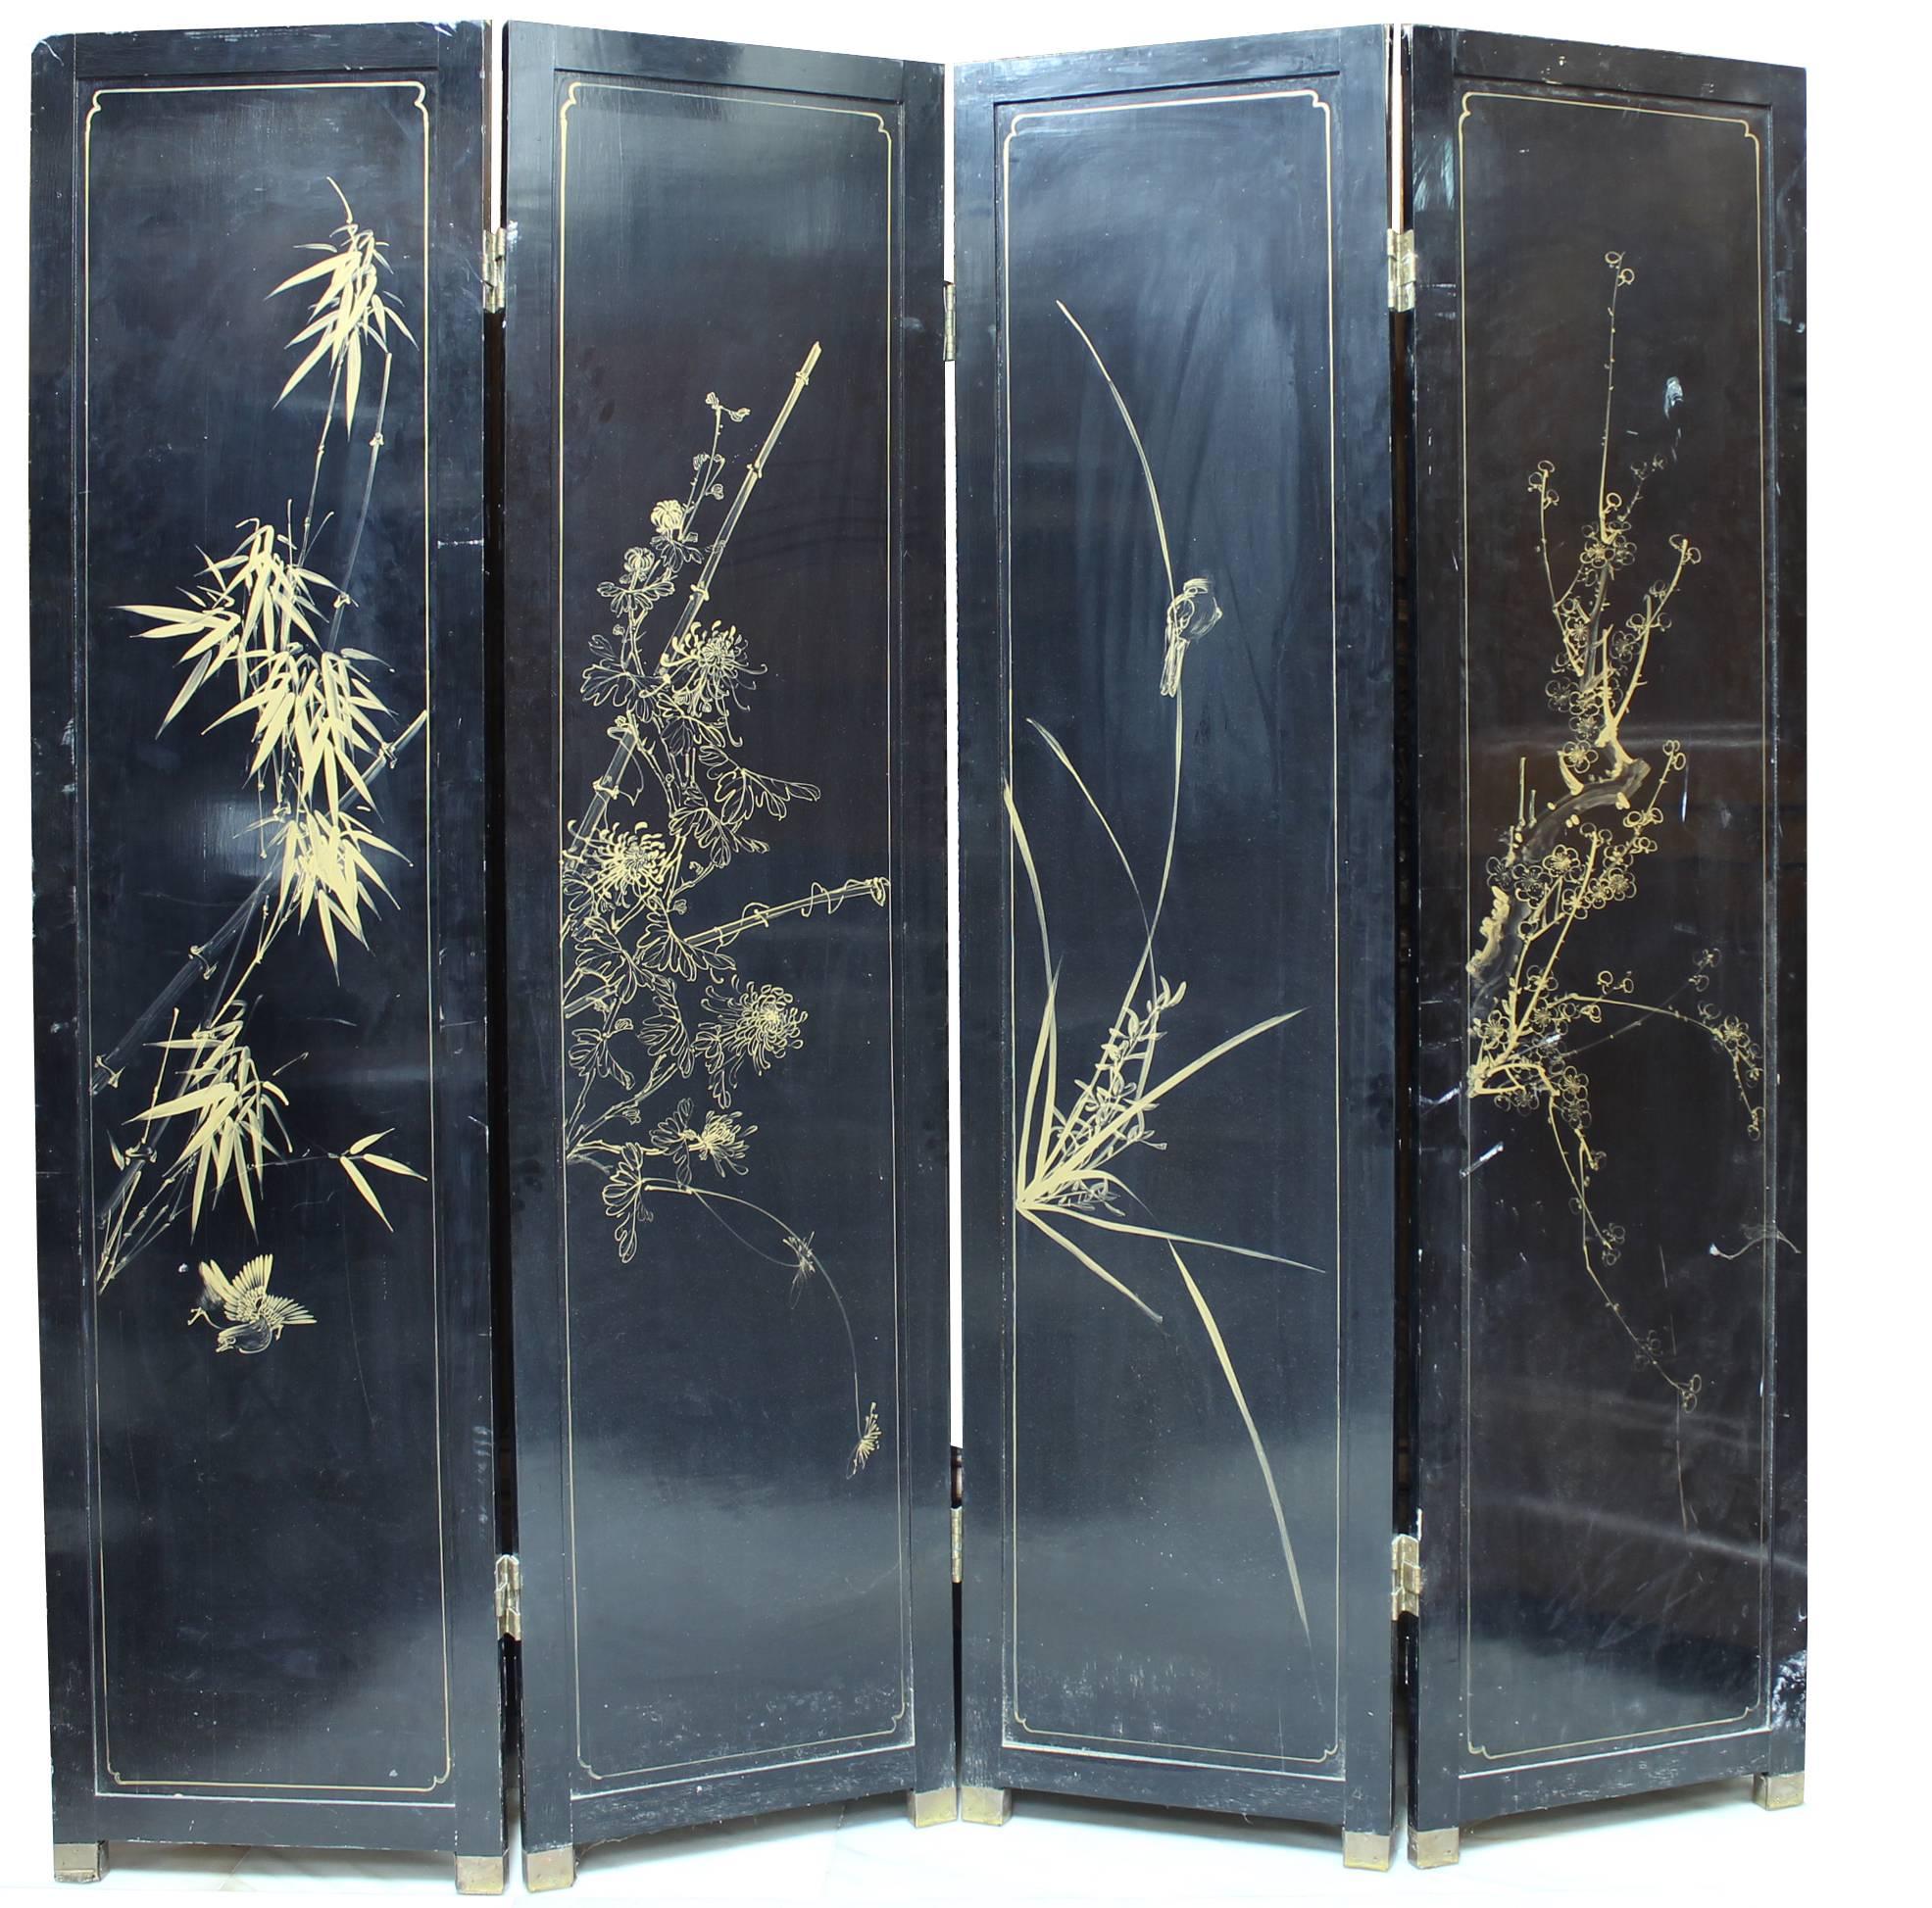 Four-panel blanck and white lacquer screen decorated with a natural scene of birds and plants made with different colored jade and other hard stones. 

